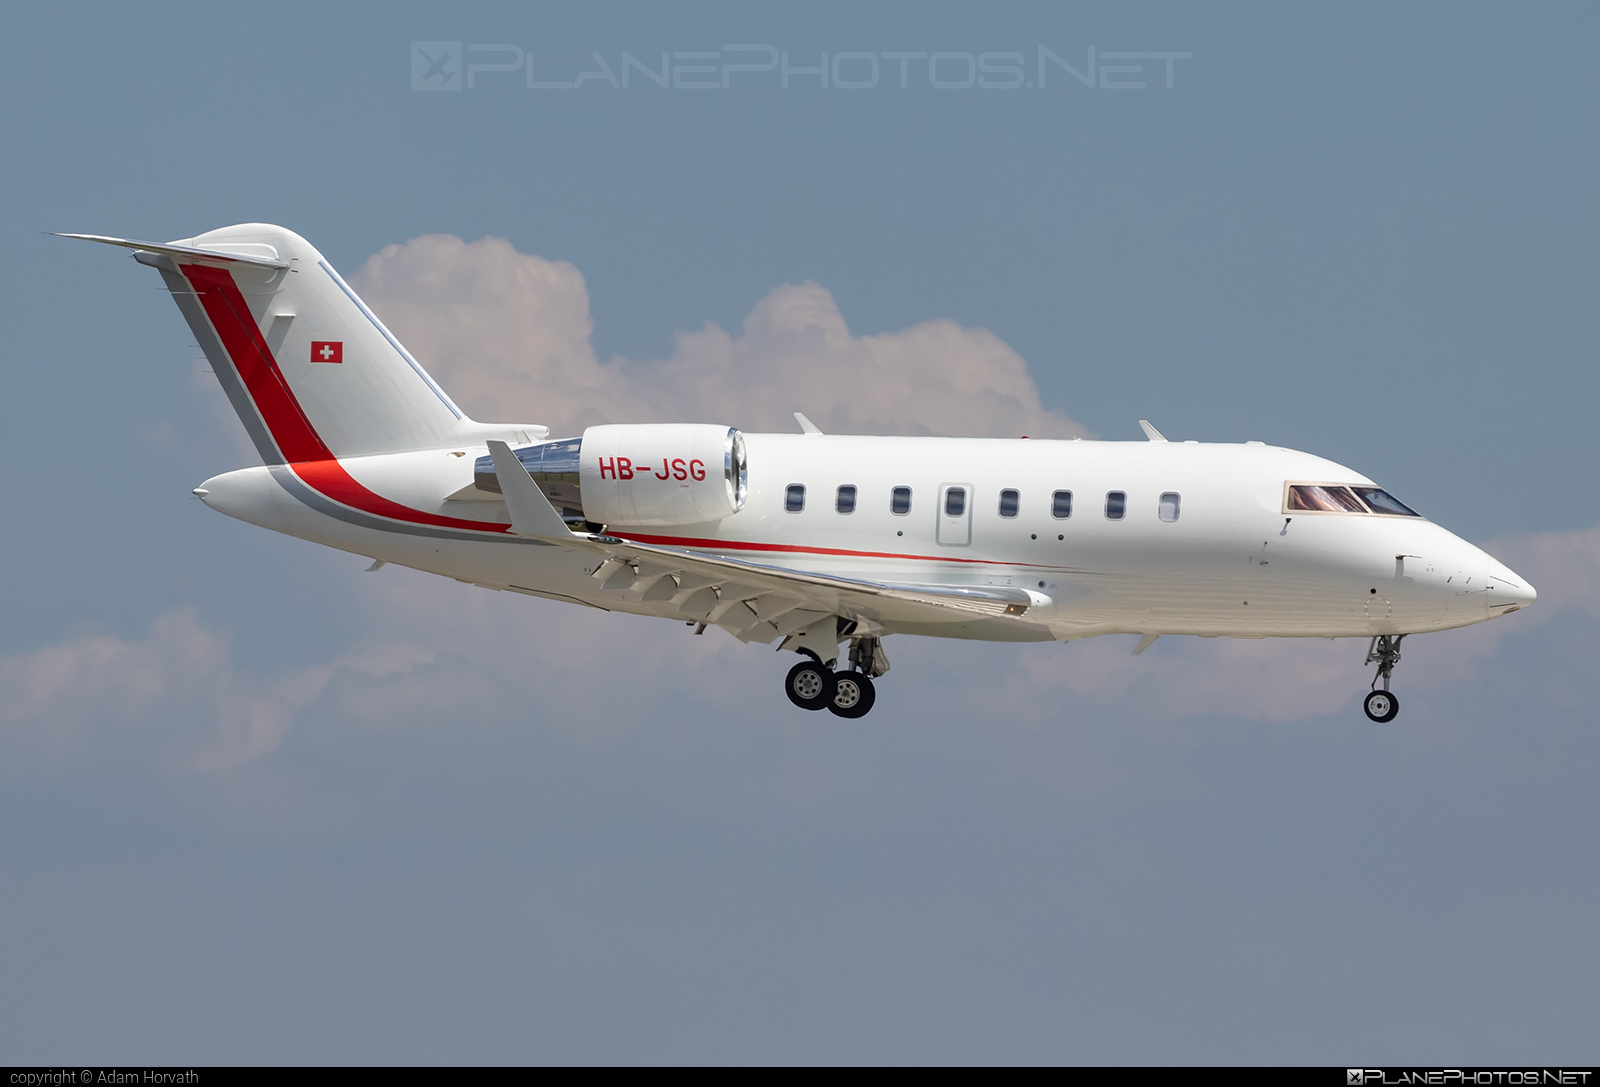 Bombardier Challenger 605 (CL-600-2B16) - HB-JSG operated by Scintilla AG #bombardier #challenger605 #cl6002b16 #scintillaAG